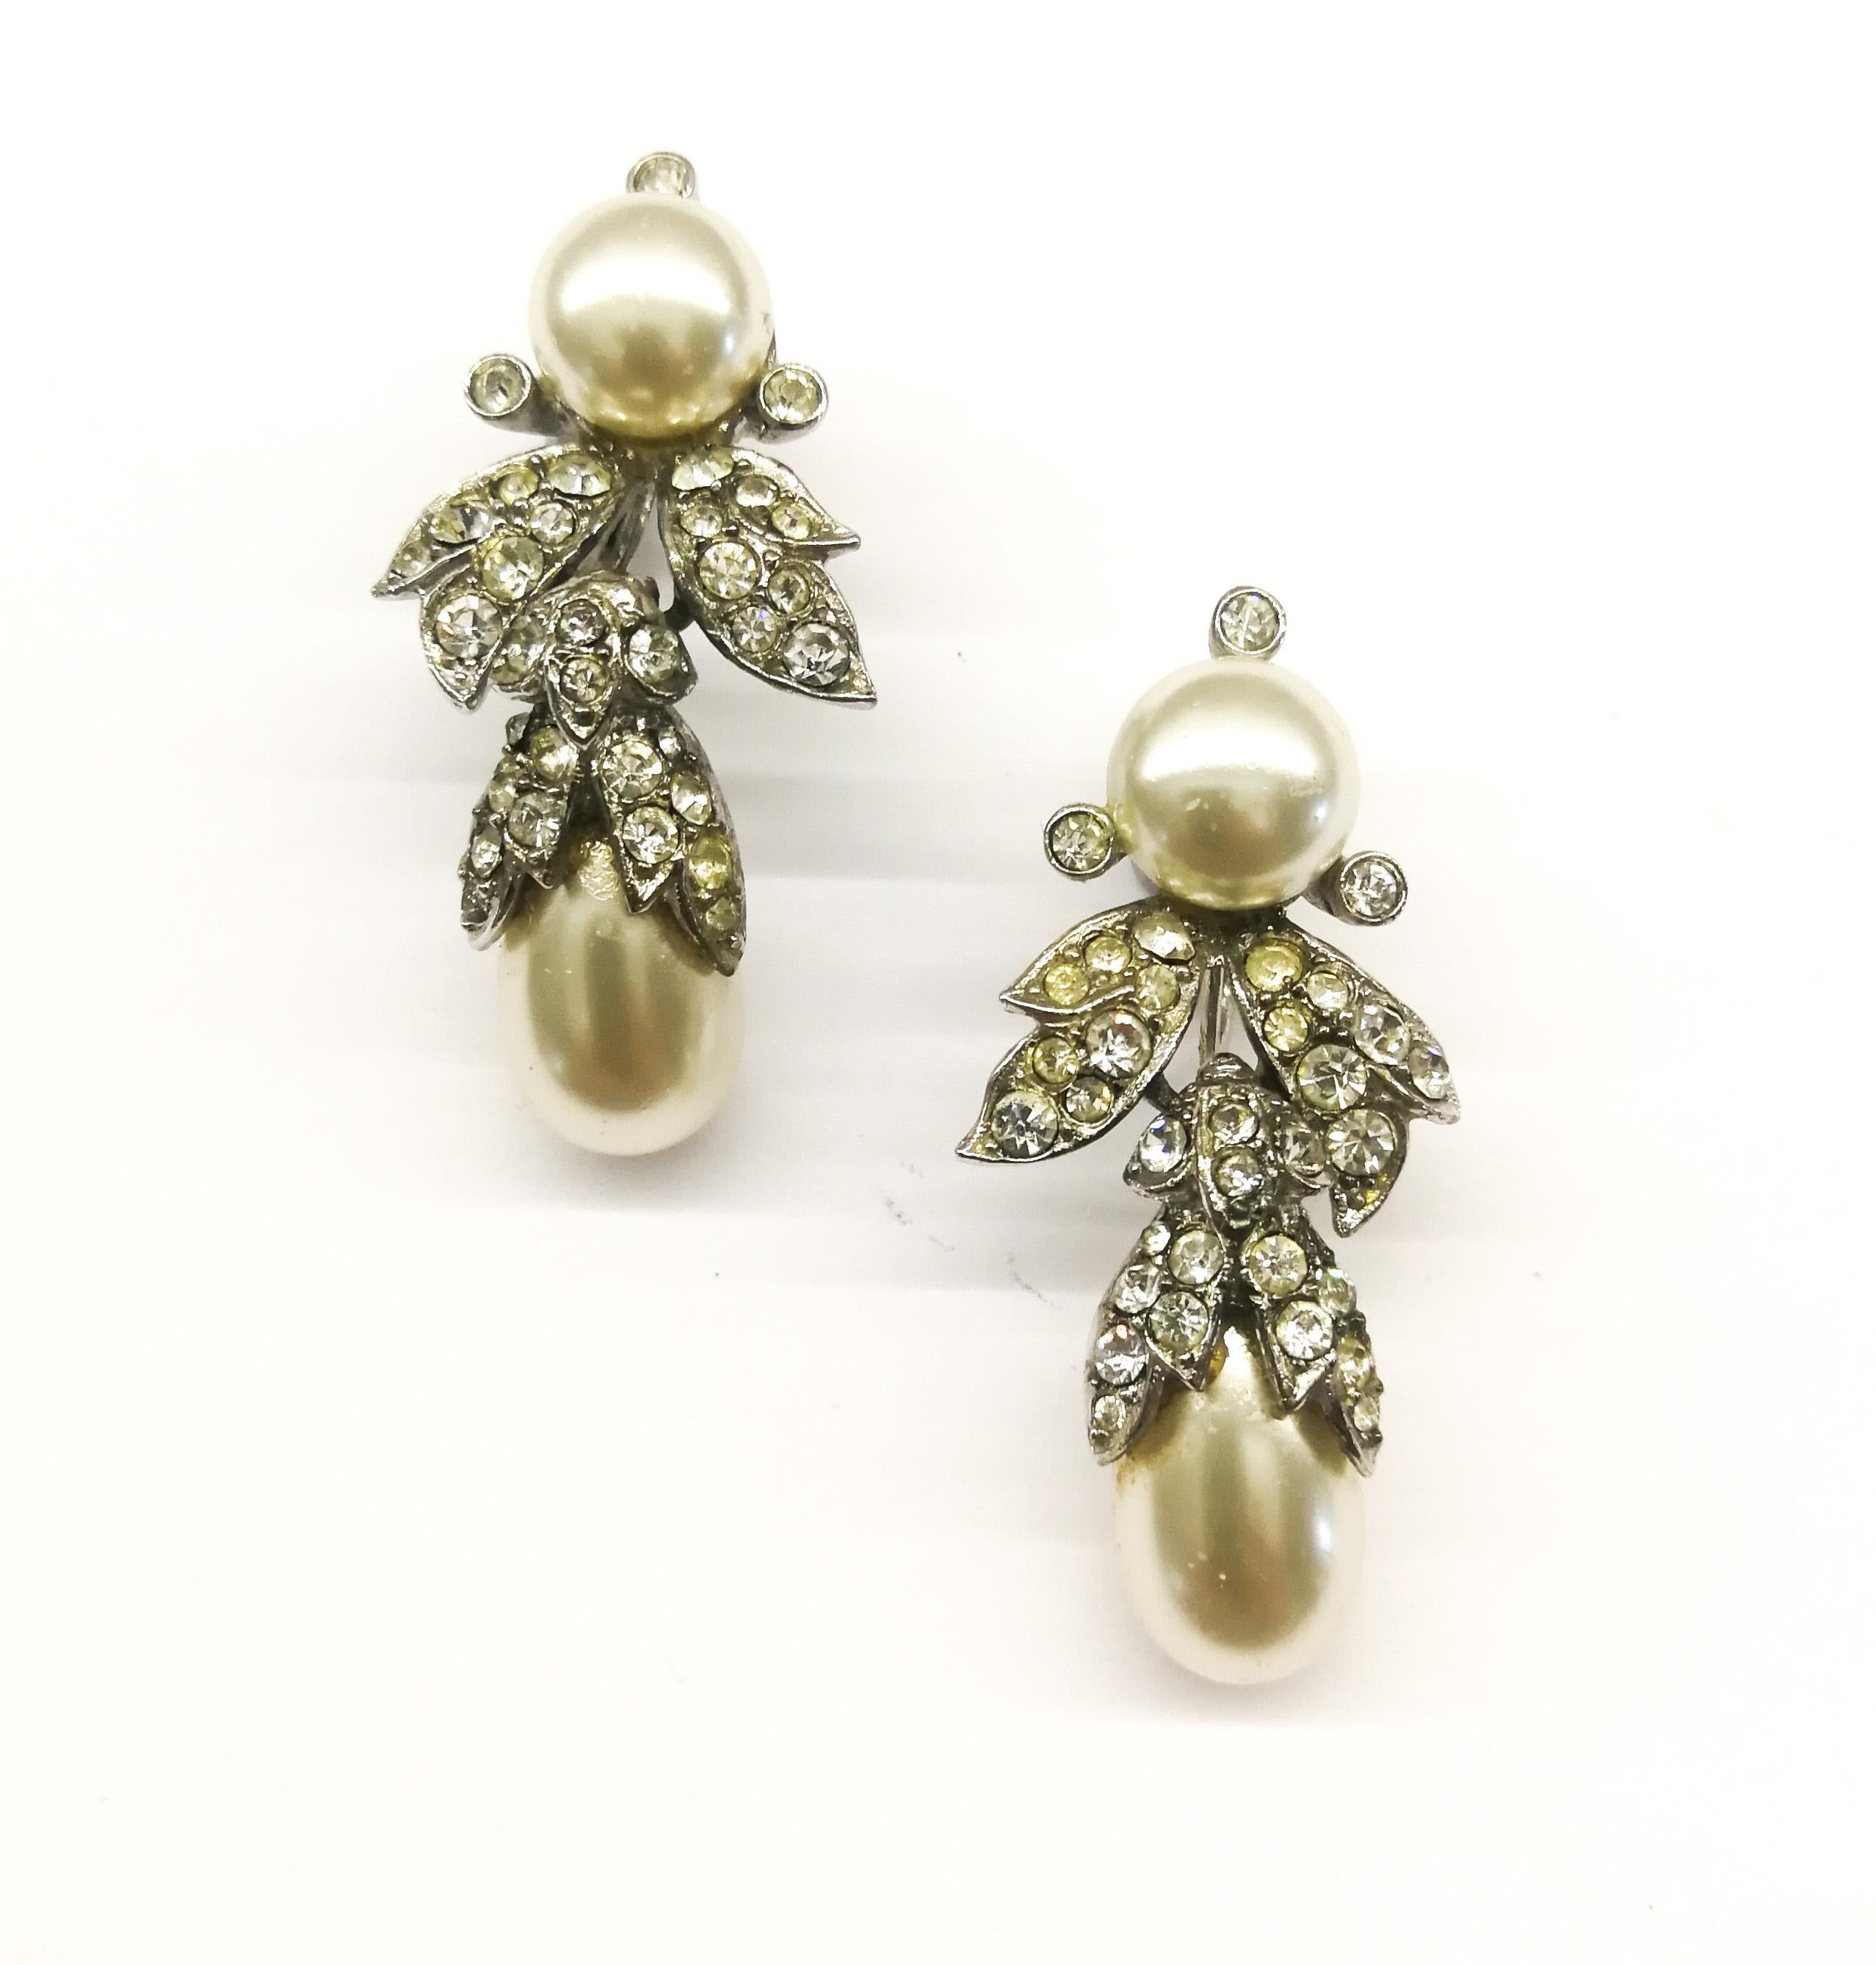 Simple and classic paste and pearl drop earrings, made by Michel Maer for Christian Dior, in the early 1950s, a small token of vintage Christian Dior heritage. Earrings such as these are great to highlight a casual look or add a certain